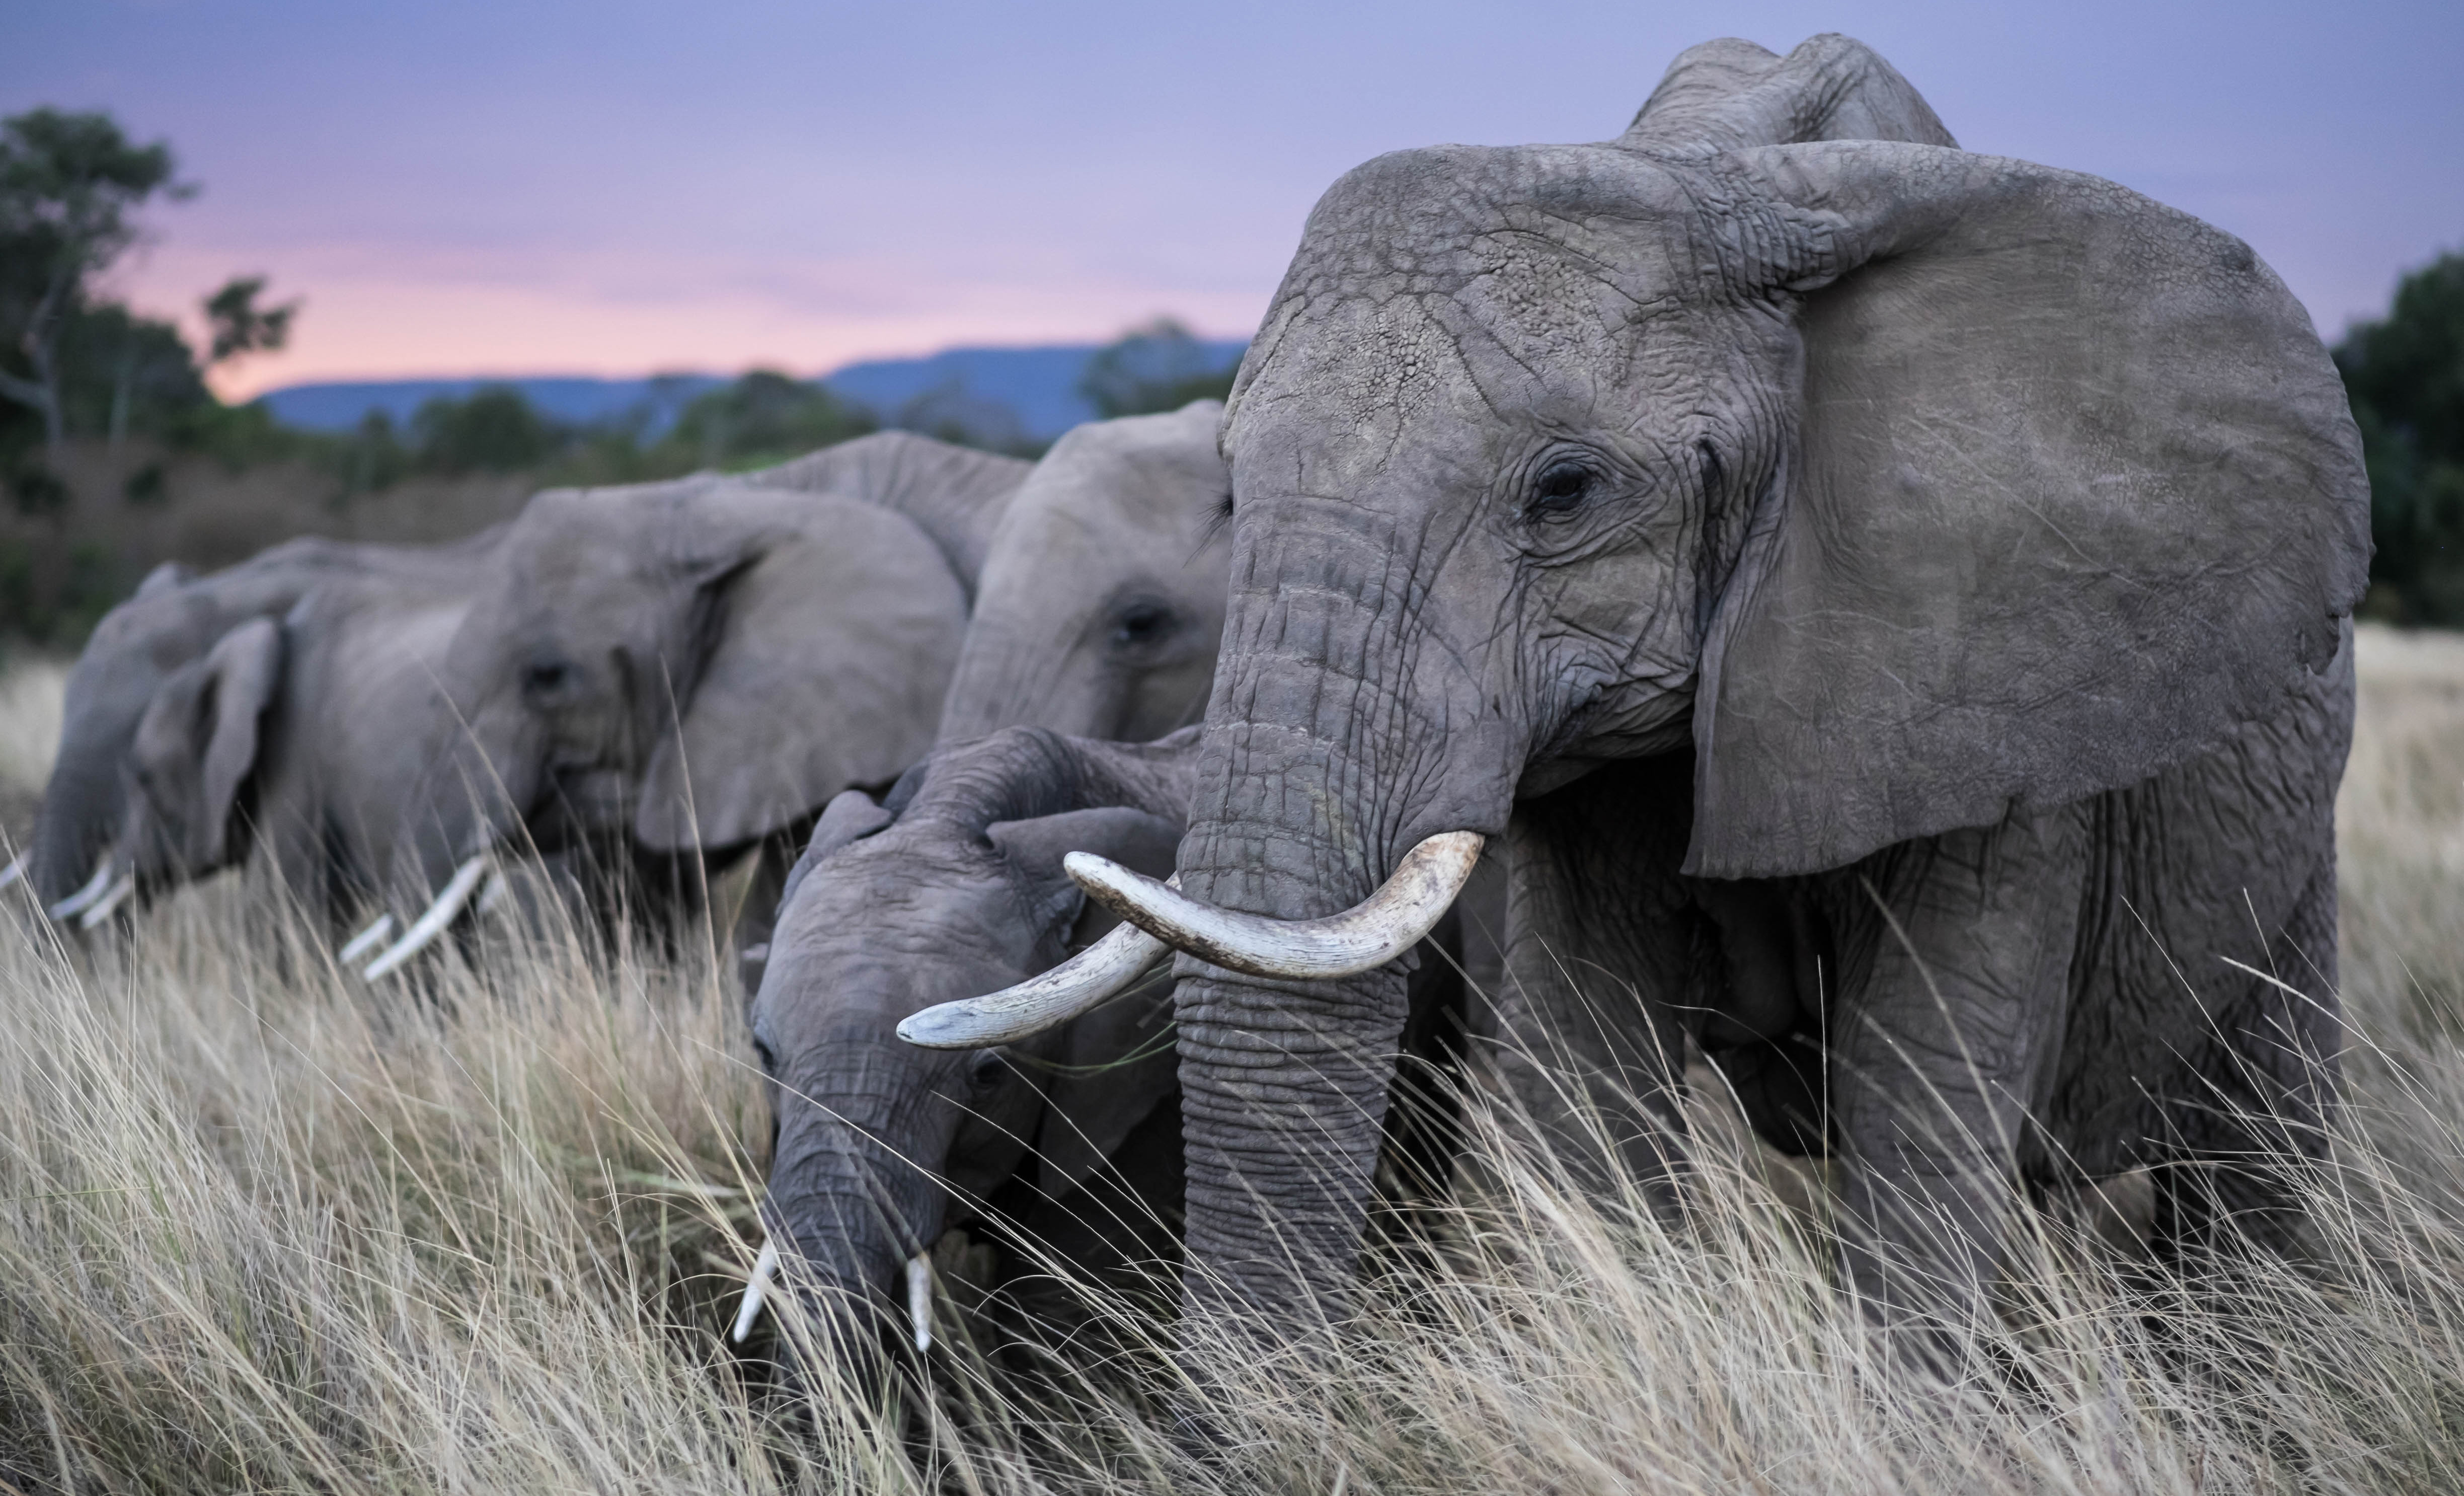 A group of elephants around tall grasses